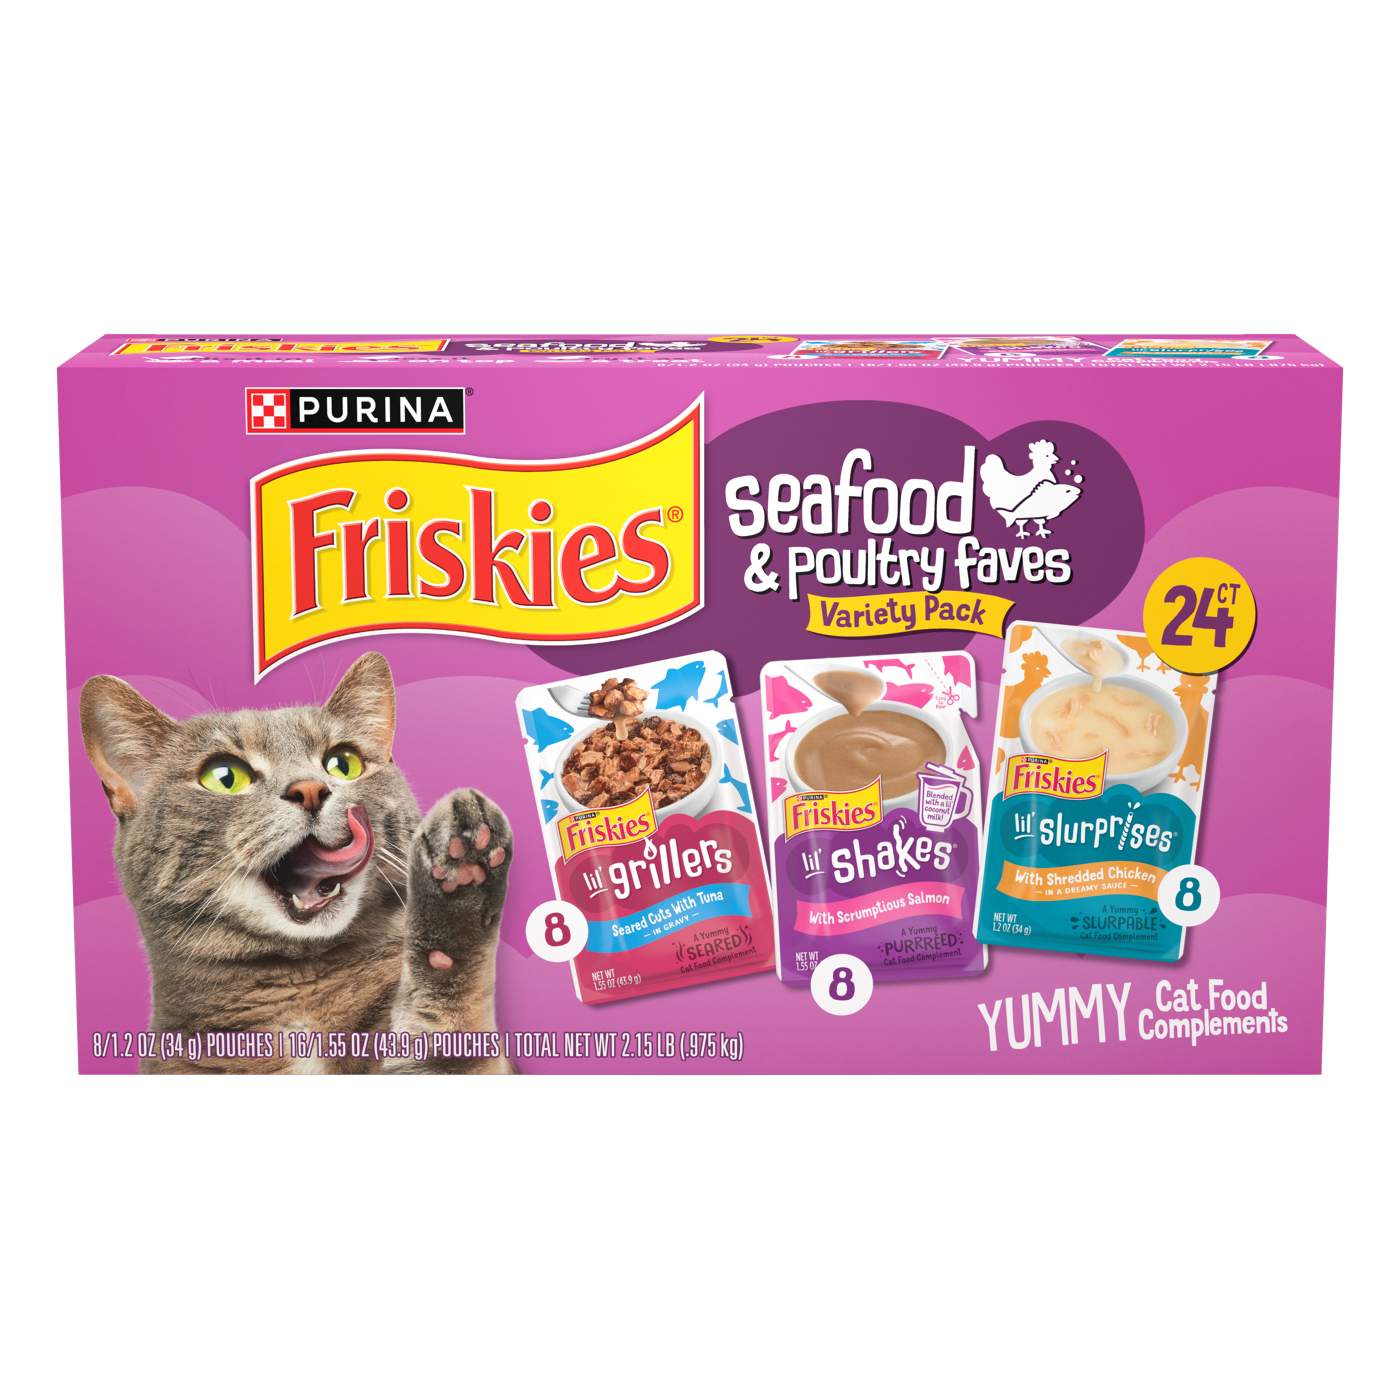 Friskies Wet Cat Treats Variety Pack, Seafood & Poultry Faves; image 1 of 7